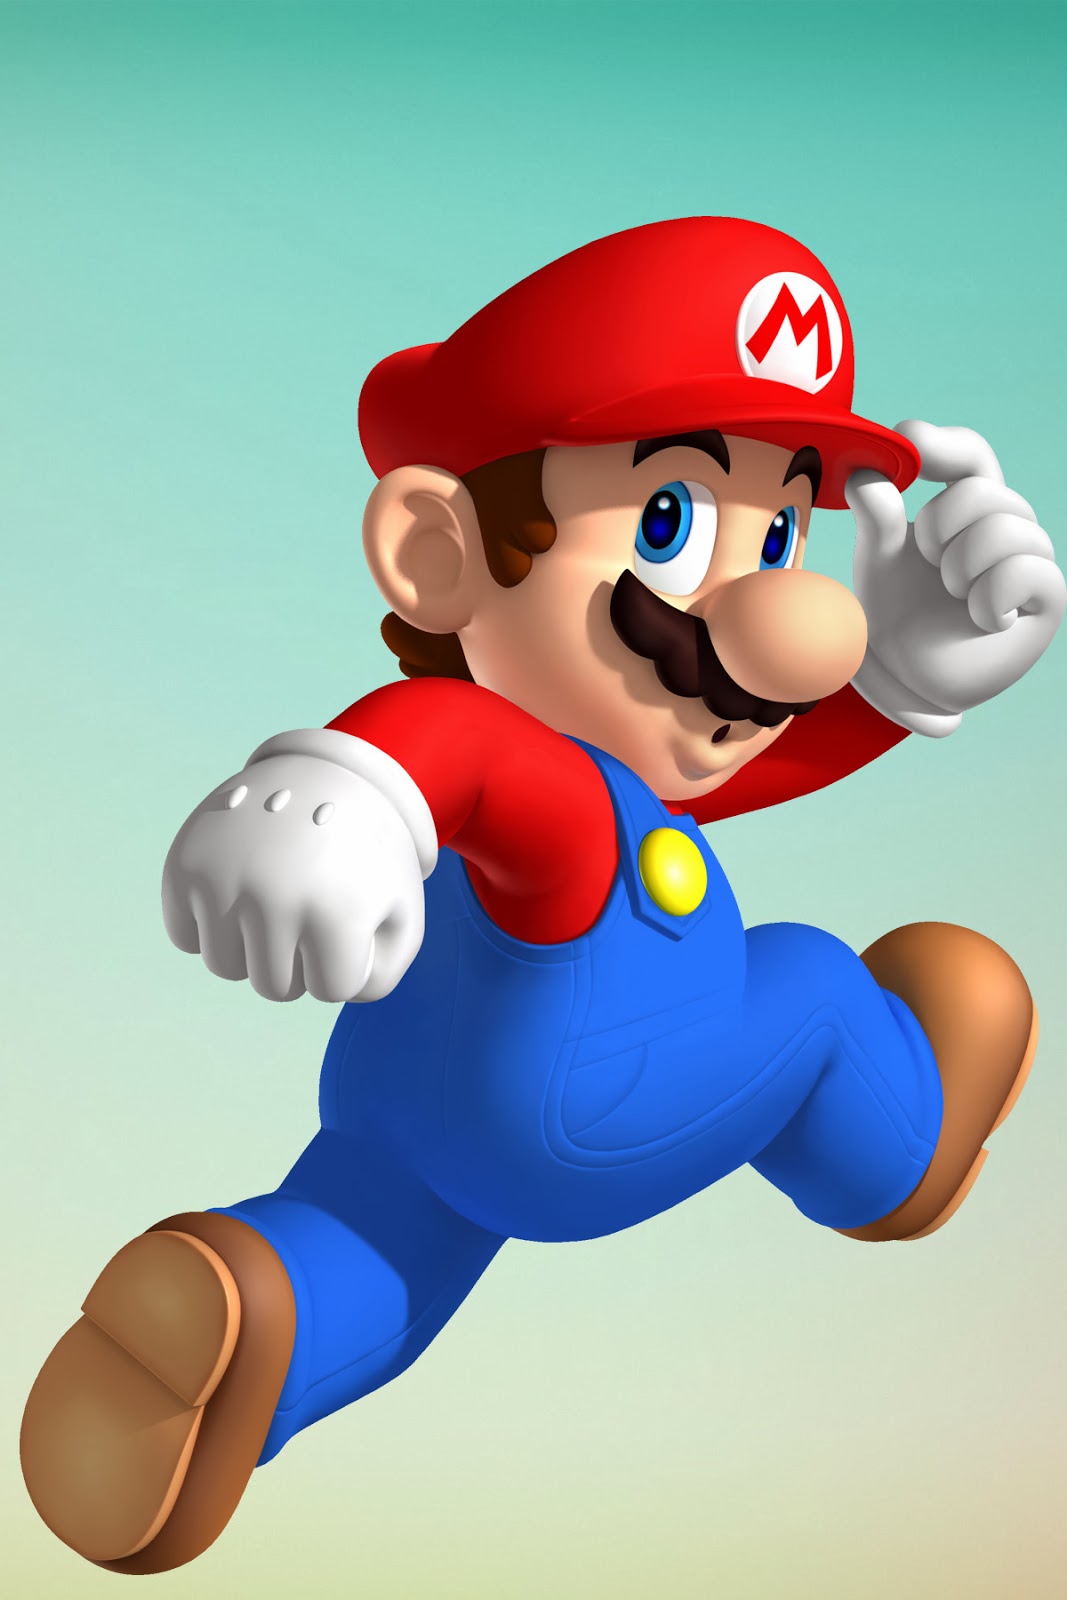 Mario Hd Wallpapers Hd Wallpapers High Definition HD Wallpapers Download Free Map Images Wallpaper [wallpaper376.blogspot.com]